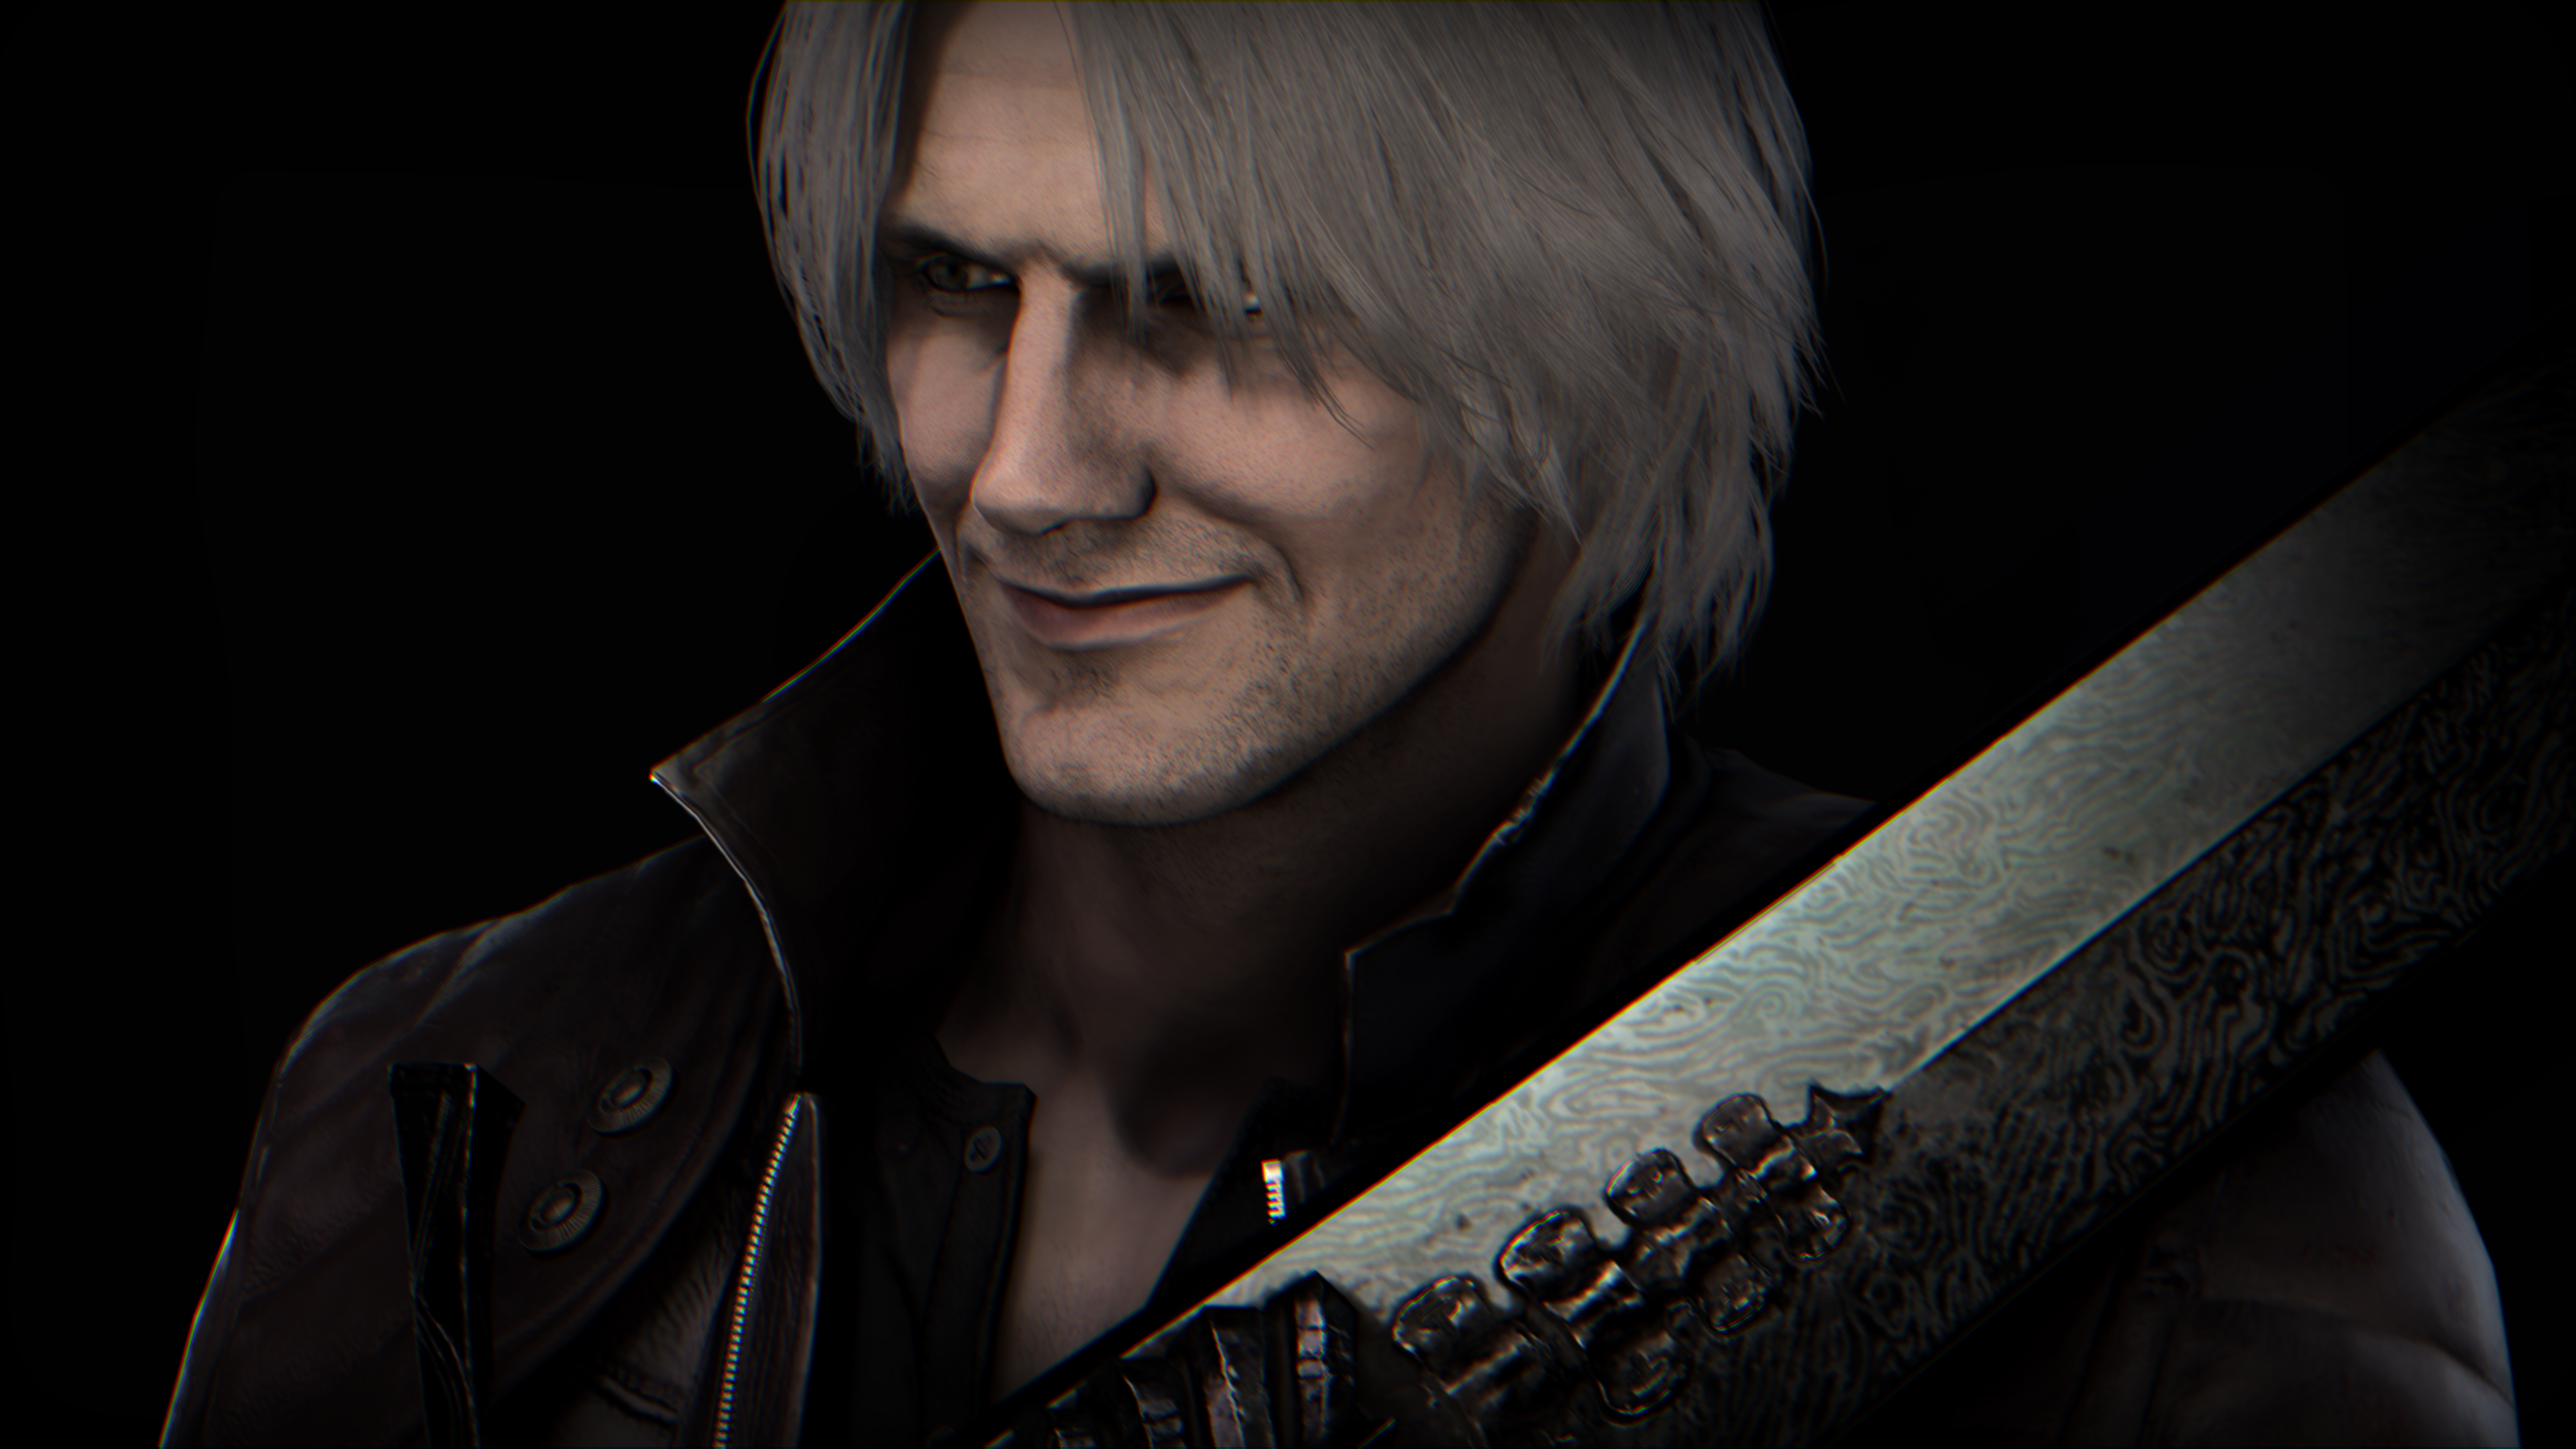 Feat:Dante from the devil may cry series (sfm/dmc) by saygoodbye-sfm on  DeviantArt